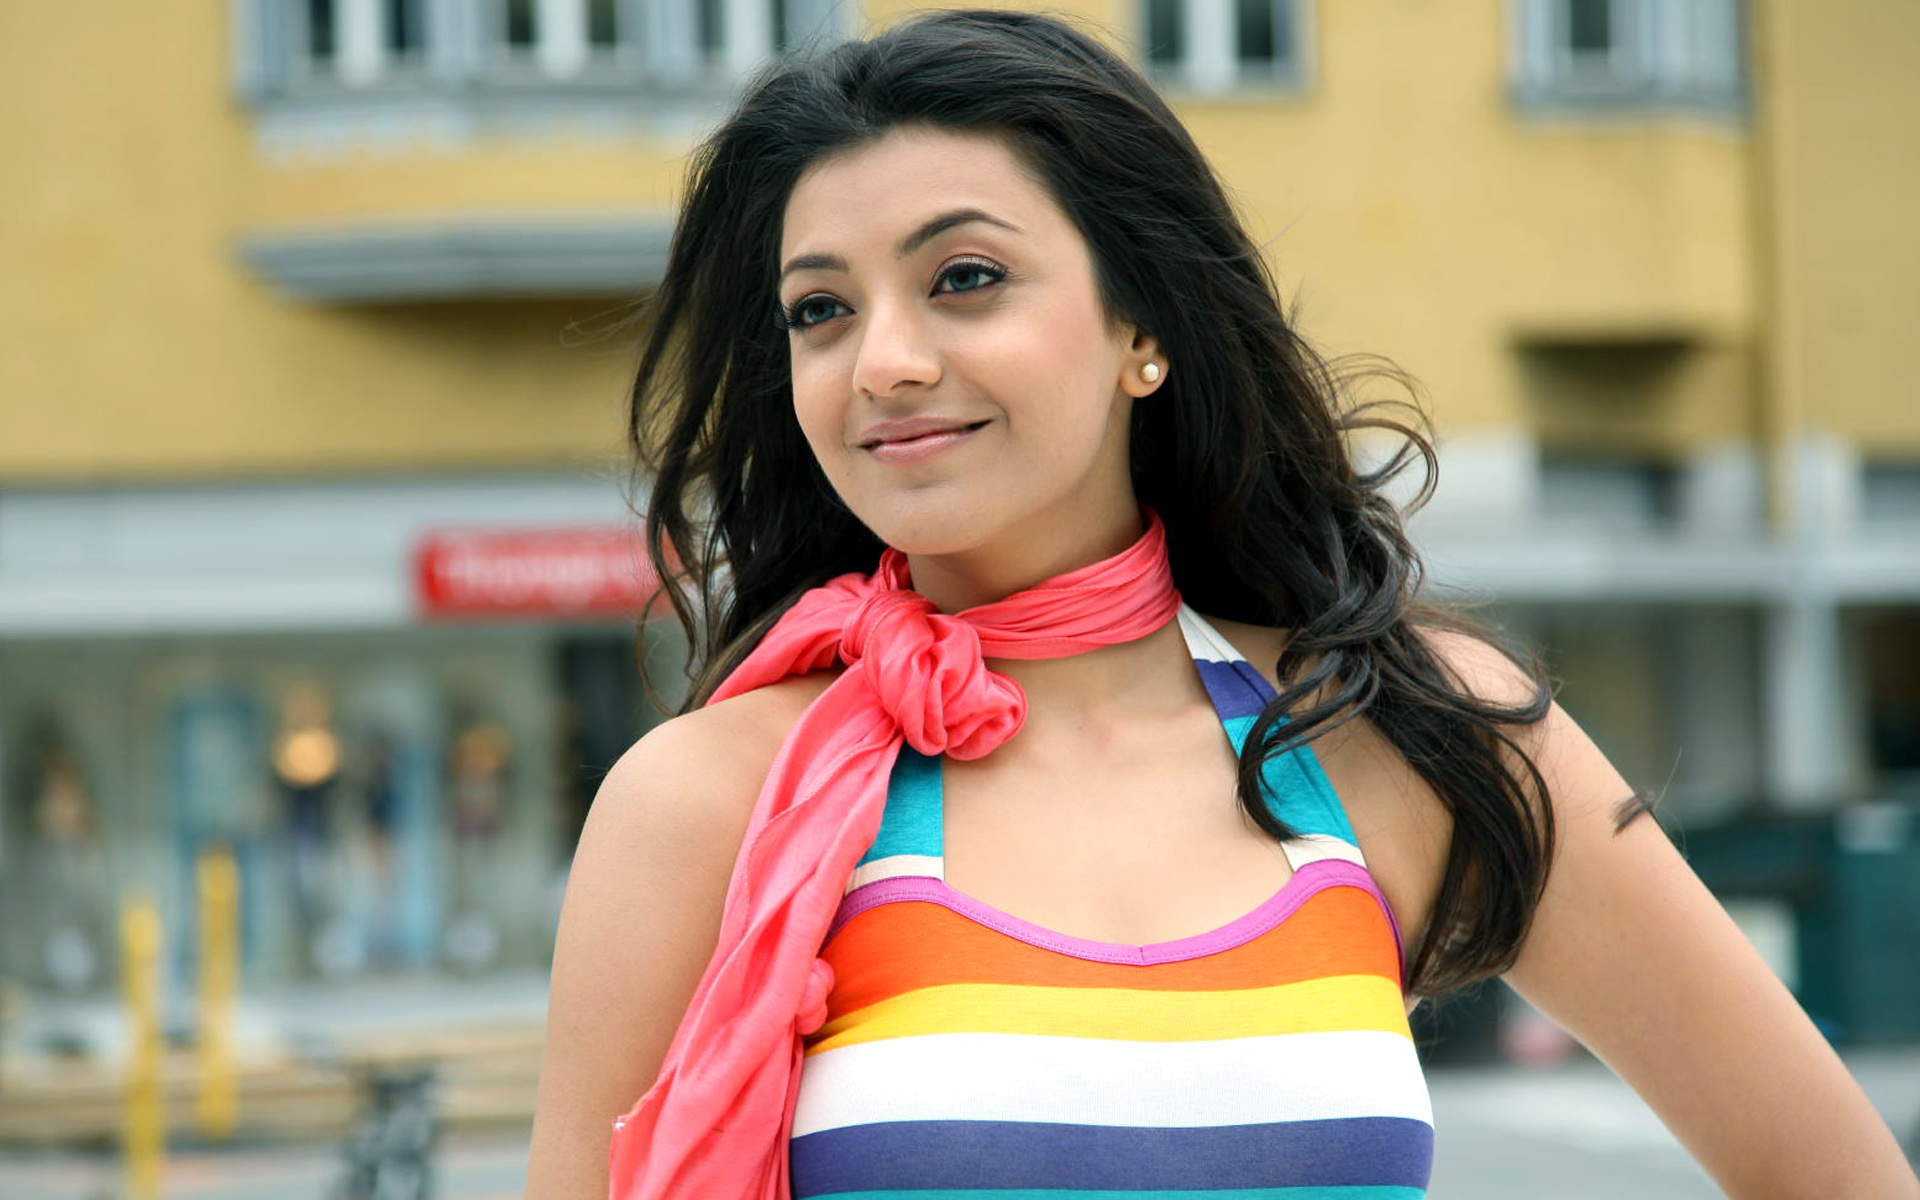 kajal agrawal images for android 